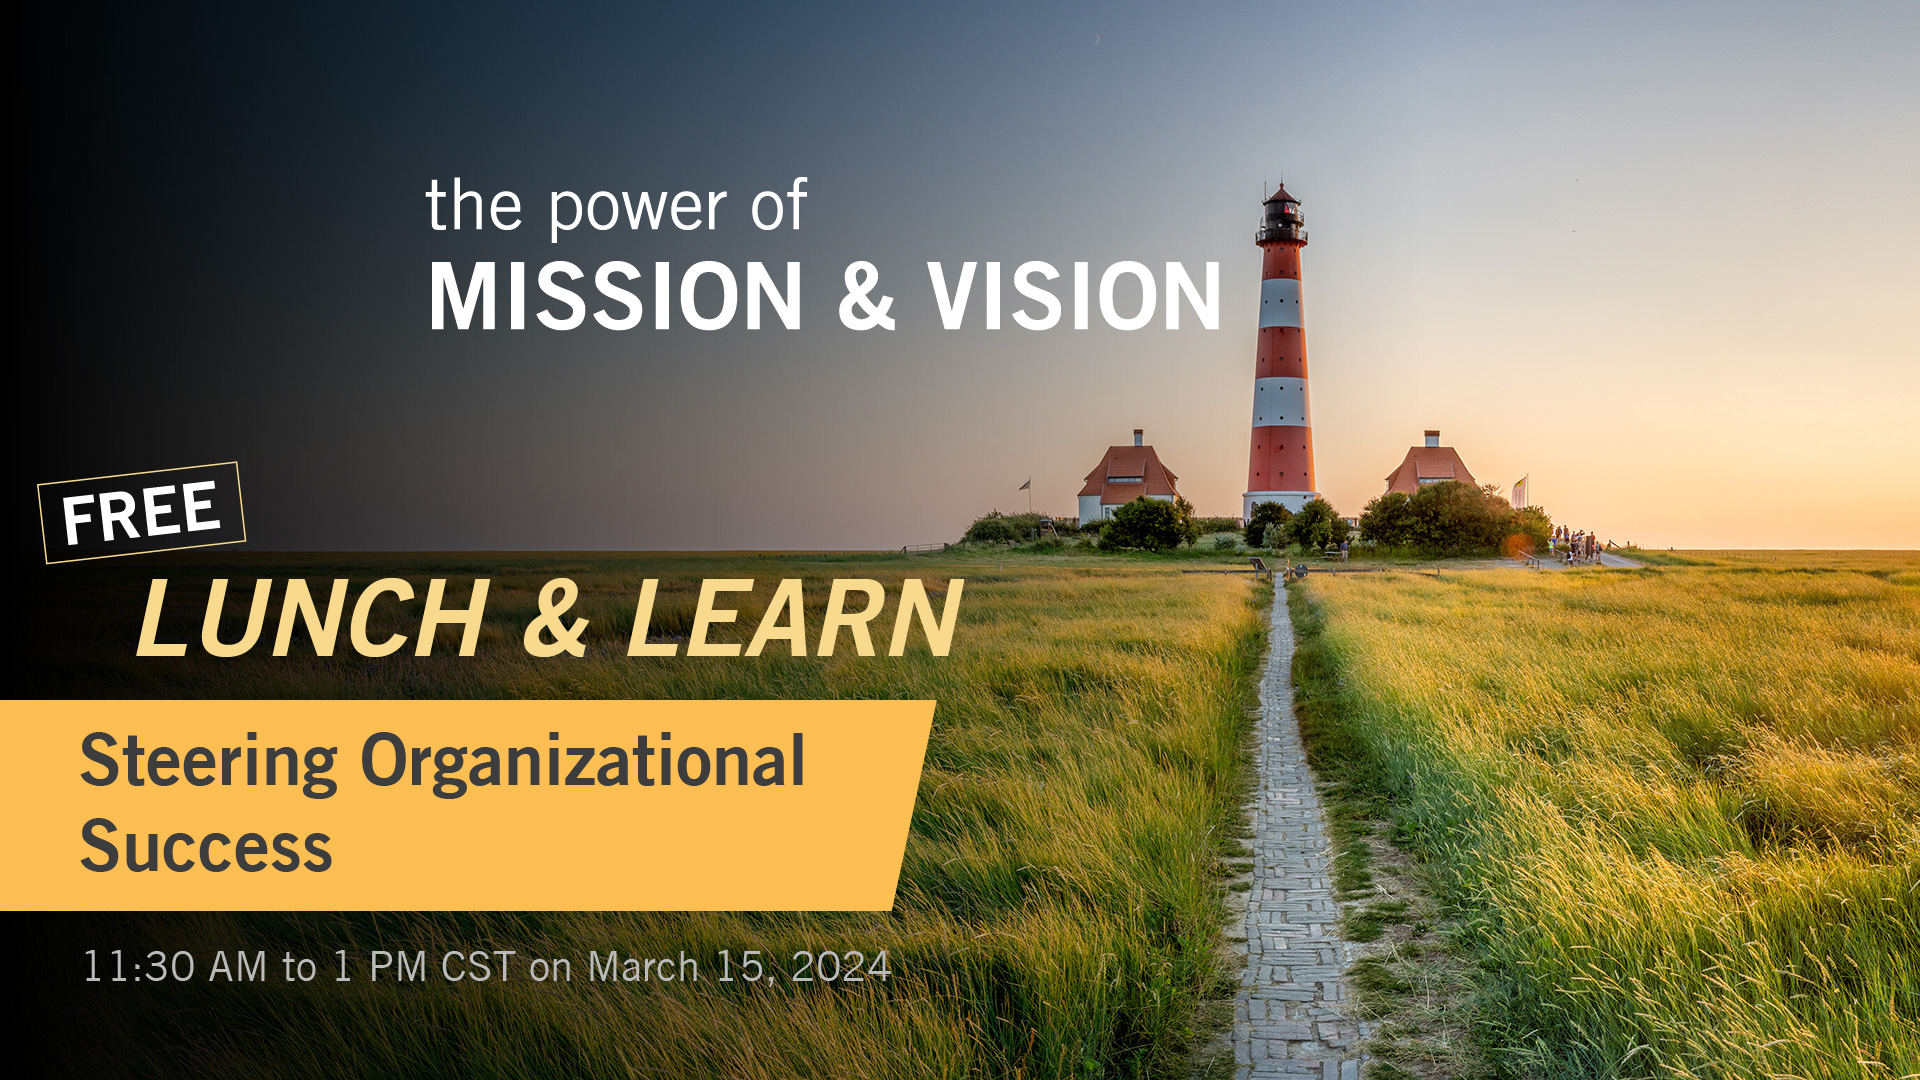 Image of a lighthouse. Infographic for "The Power of Mission and Vision" free lunch & learn.